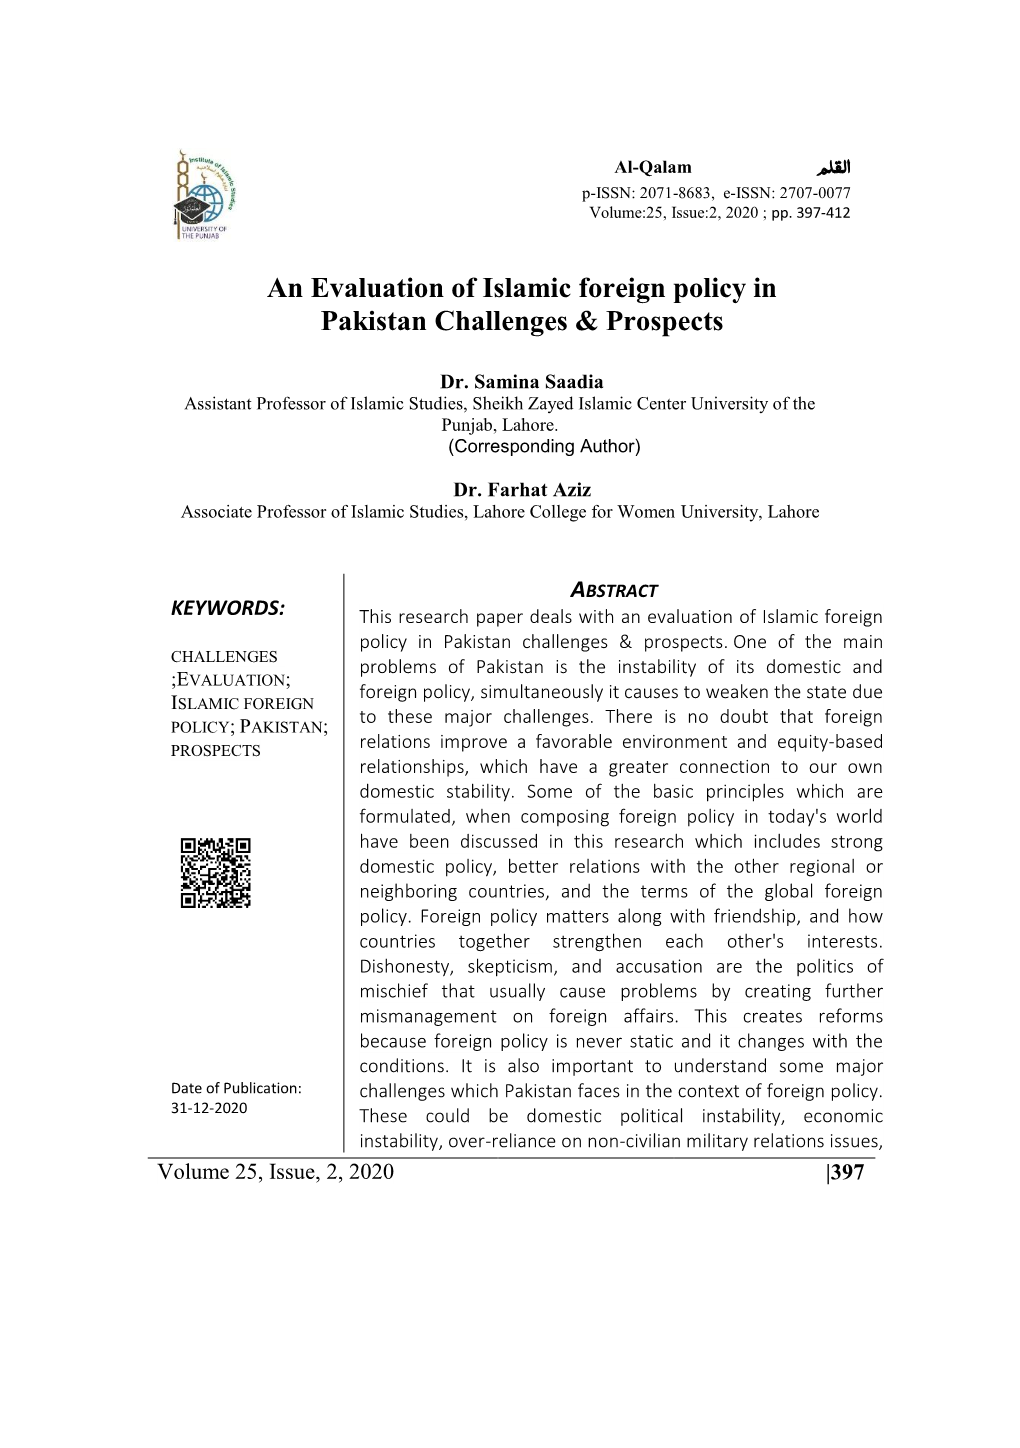 An Evaluation of Islamic Foreign Policy in Pakistan Challenges & Prospects